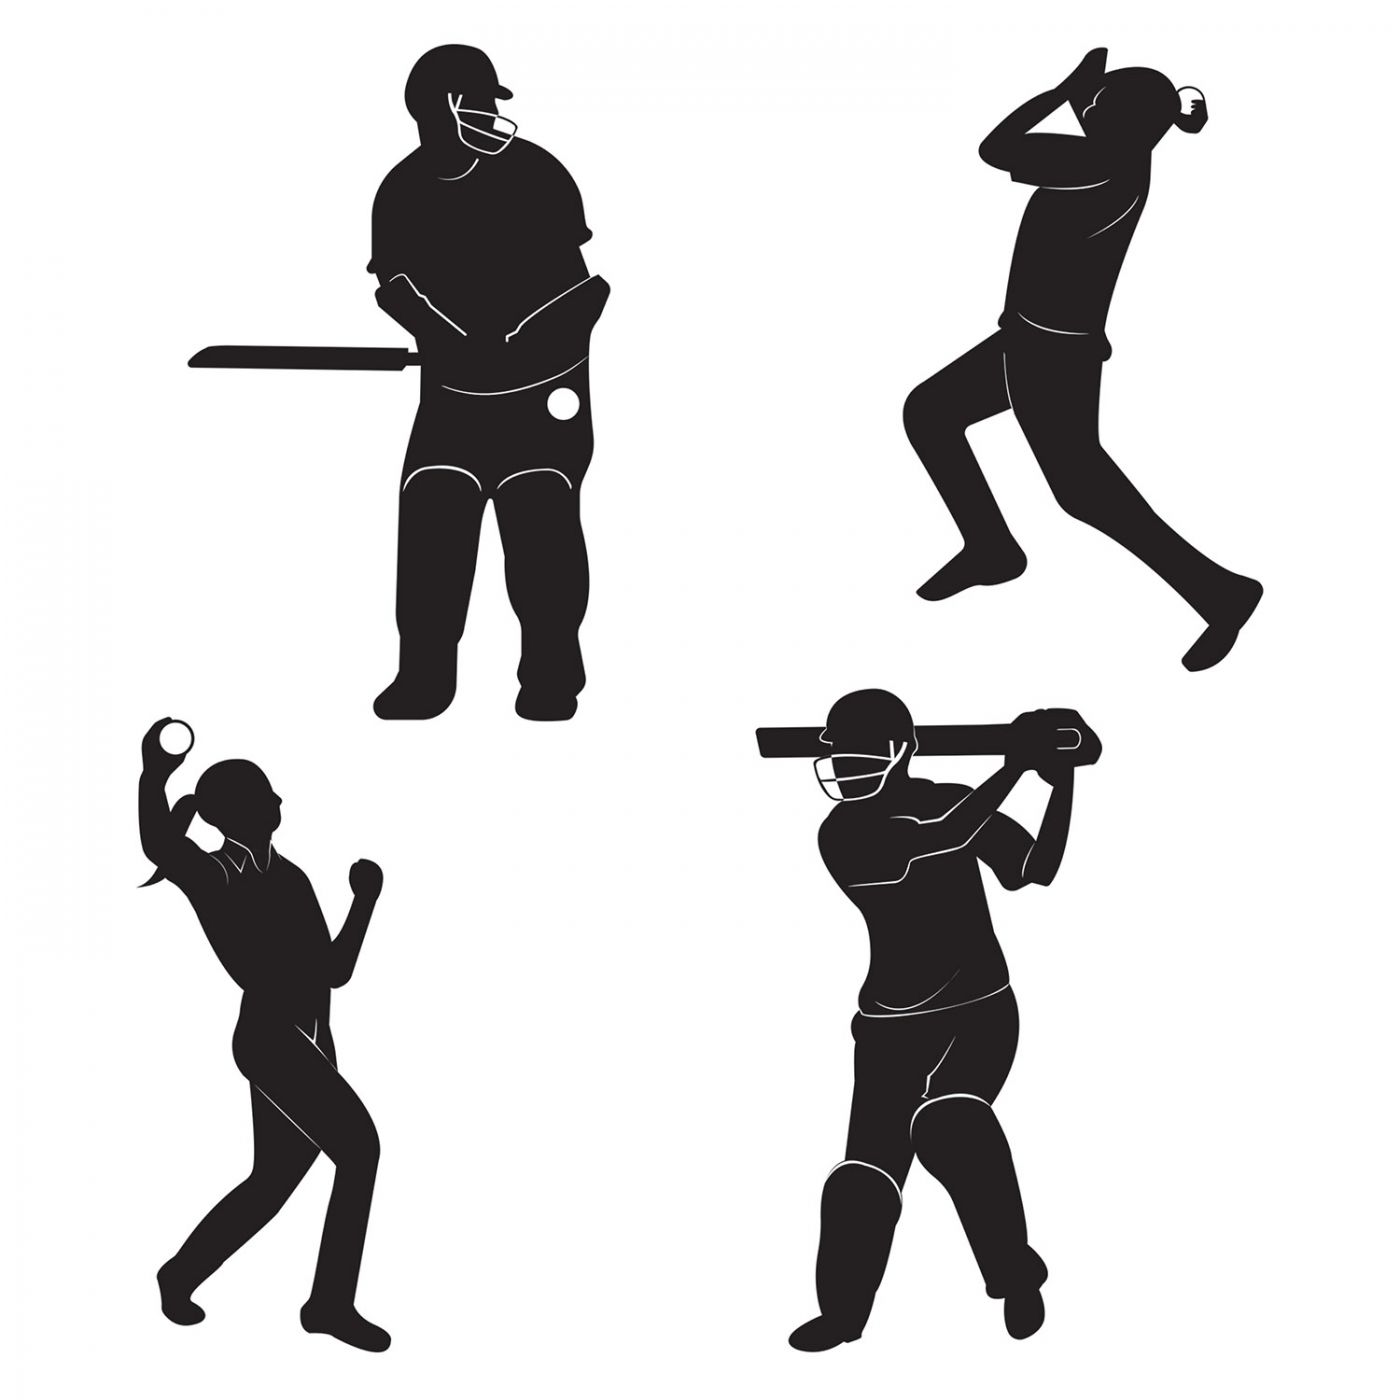 Cricket Player Silhouettes (12) image